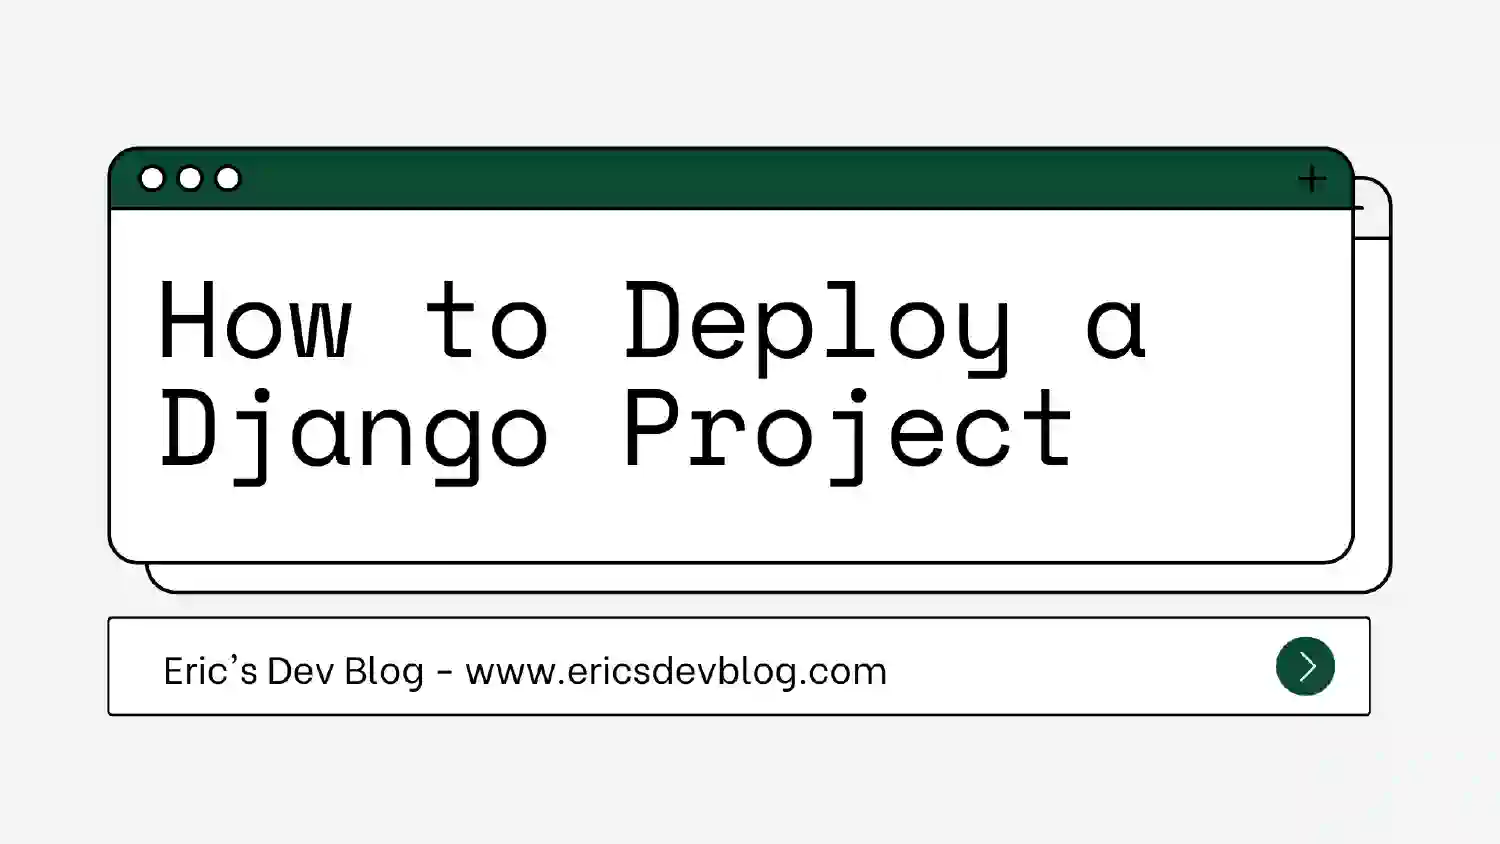 How to Deploy a Django Project